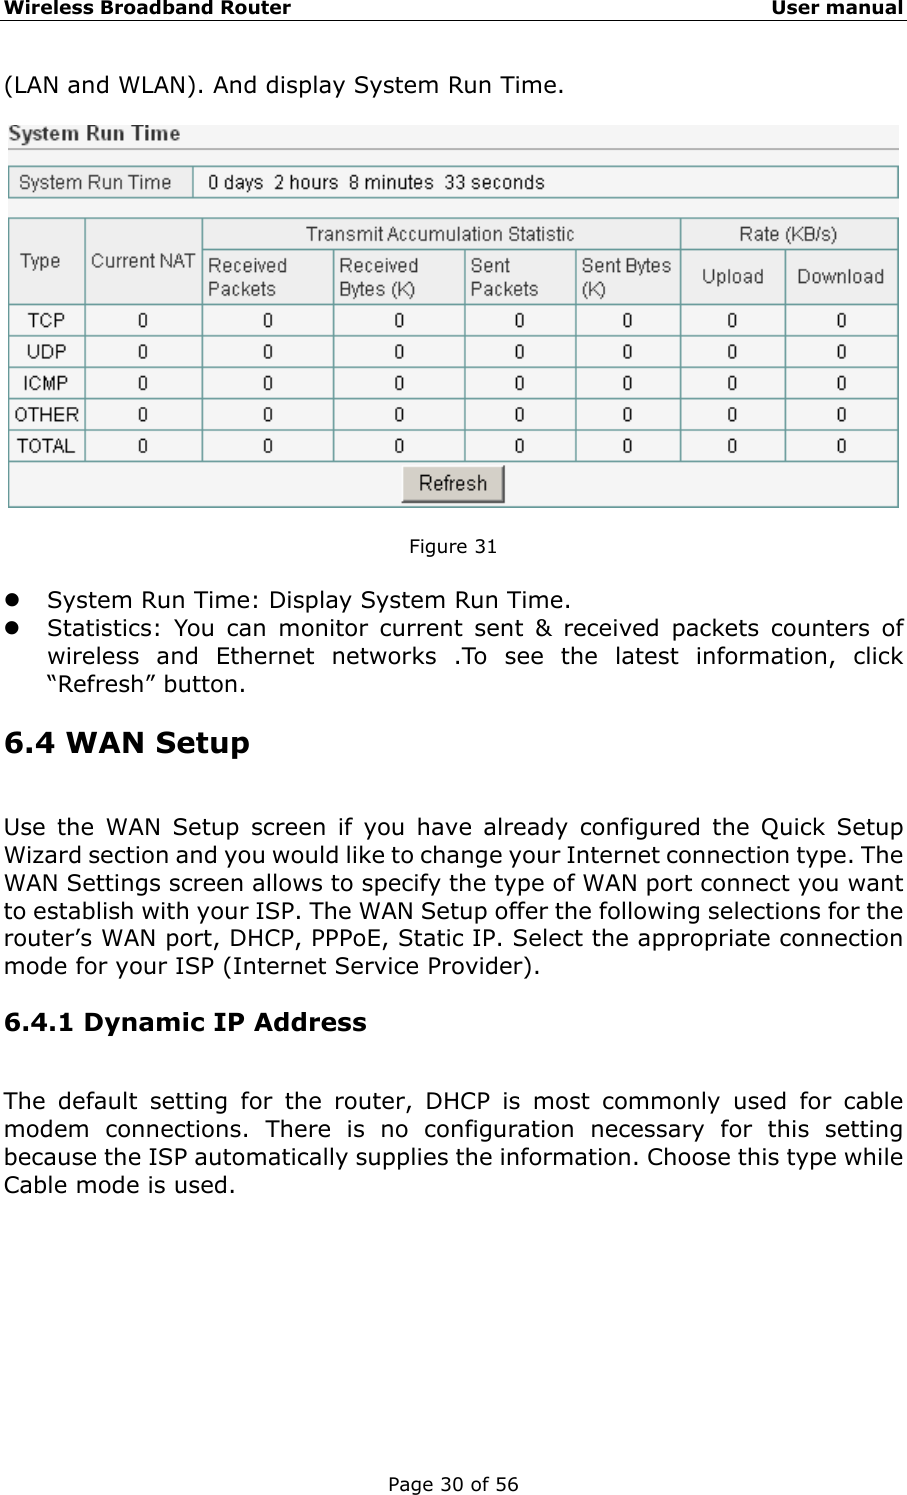 Wireless Broadband Router                                                   User manual Page 30 of 56 (LAN and WLAN). And display System Run Time.    Figure 31  z System Run Time: Display System Run Time. z Statistics: You can monitor current sent &amp; received packets counters of wireless and Ethernet networks .To see the latest information, click “Refresh” button. 6.4 WAN Setup   Use the WAN Setup screen if you have already configured the Quick Setup Wizard section and you would like to change your Internet connection type. The WAN Settings screen allows to specify the type of WAN port connect you want to establish with your ISP. The WAN Setup offer the following selections for the router’s WAN port, DHCP, PPPoE, Static IP. Select the appropriate connection mode for your ISP (Internet Service Provider). 6.4.1 Dynamic IP Address The default setting for the router, DHCP is most commonly used for cable modem connections. There is no configuration necessary for this setting because the ISP automatically supplies the information. Choose this type while Cable mode is used.    